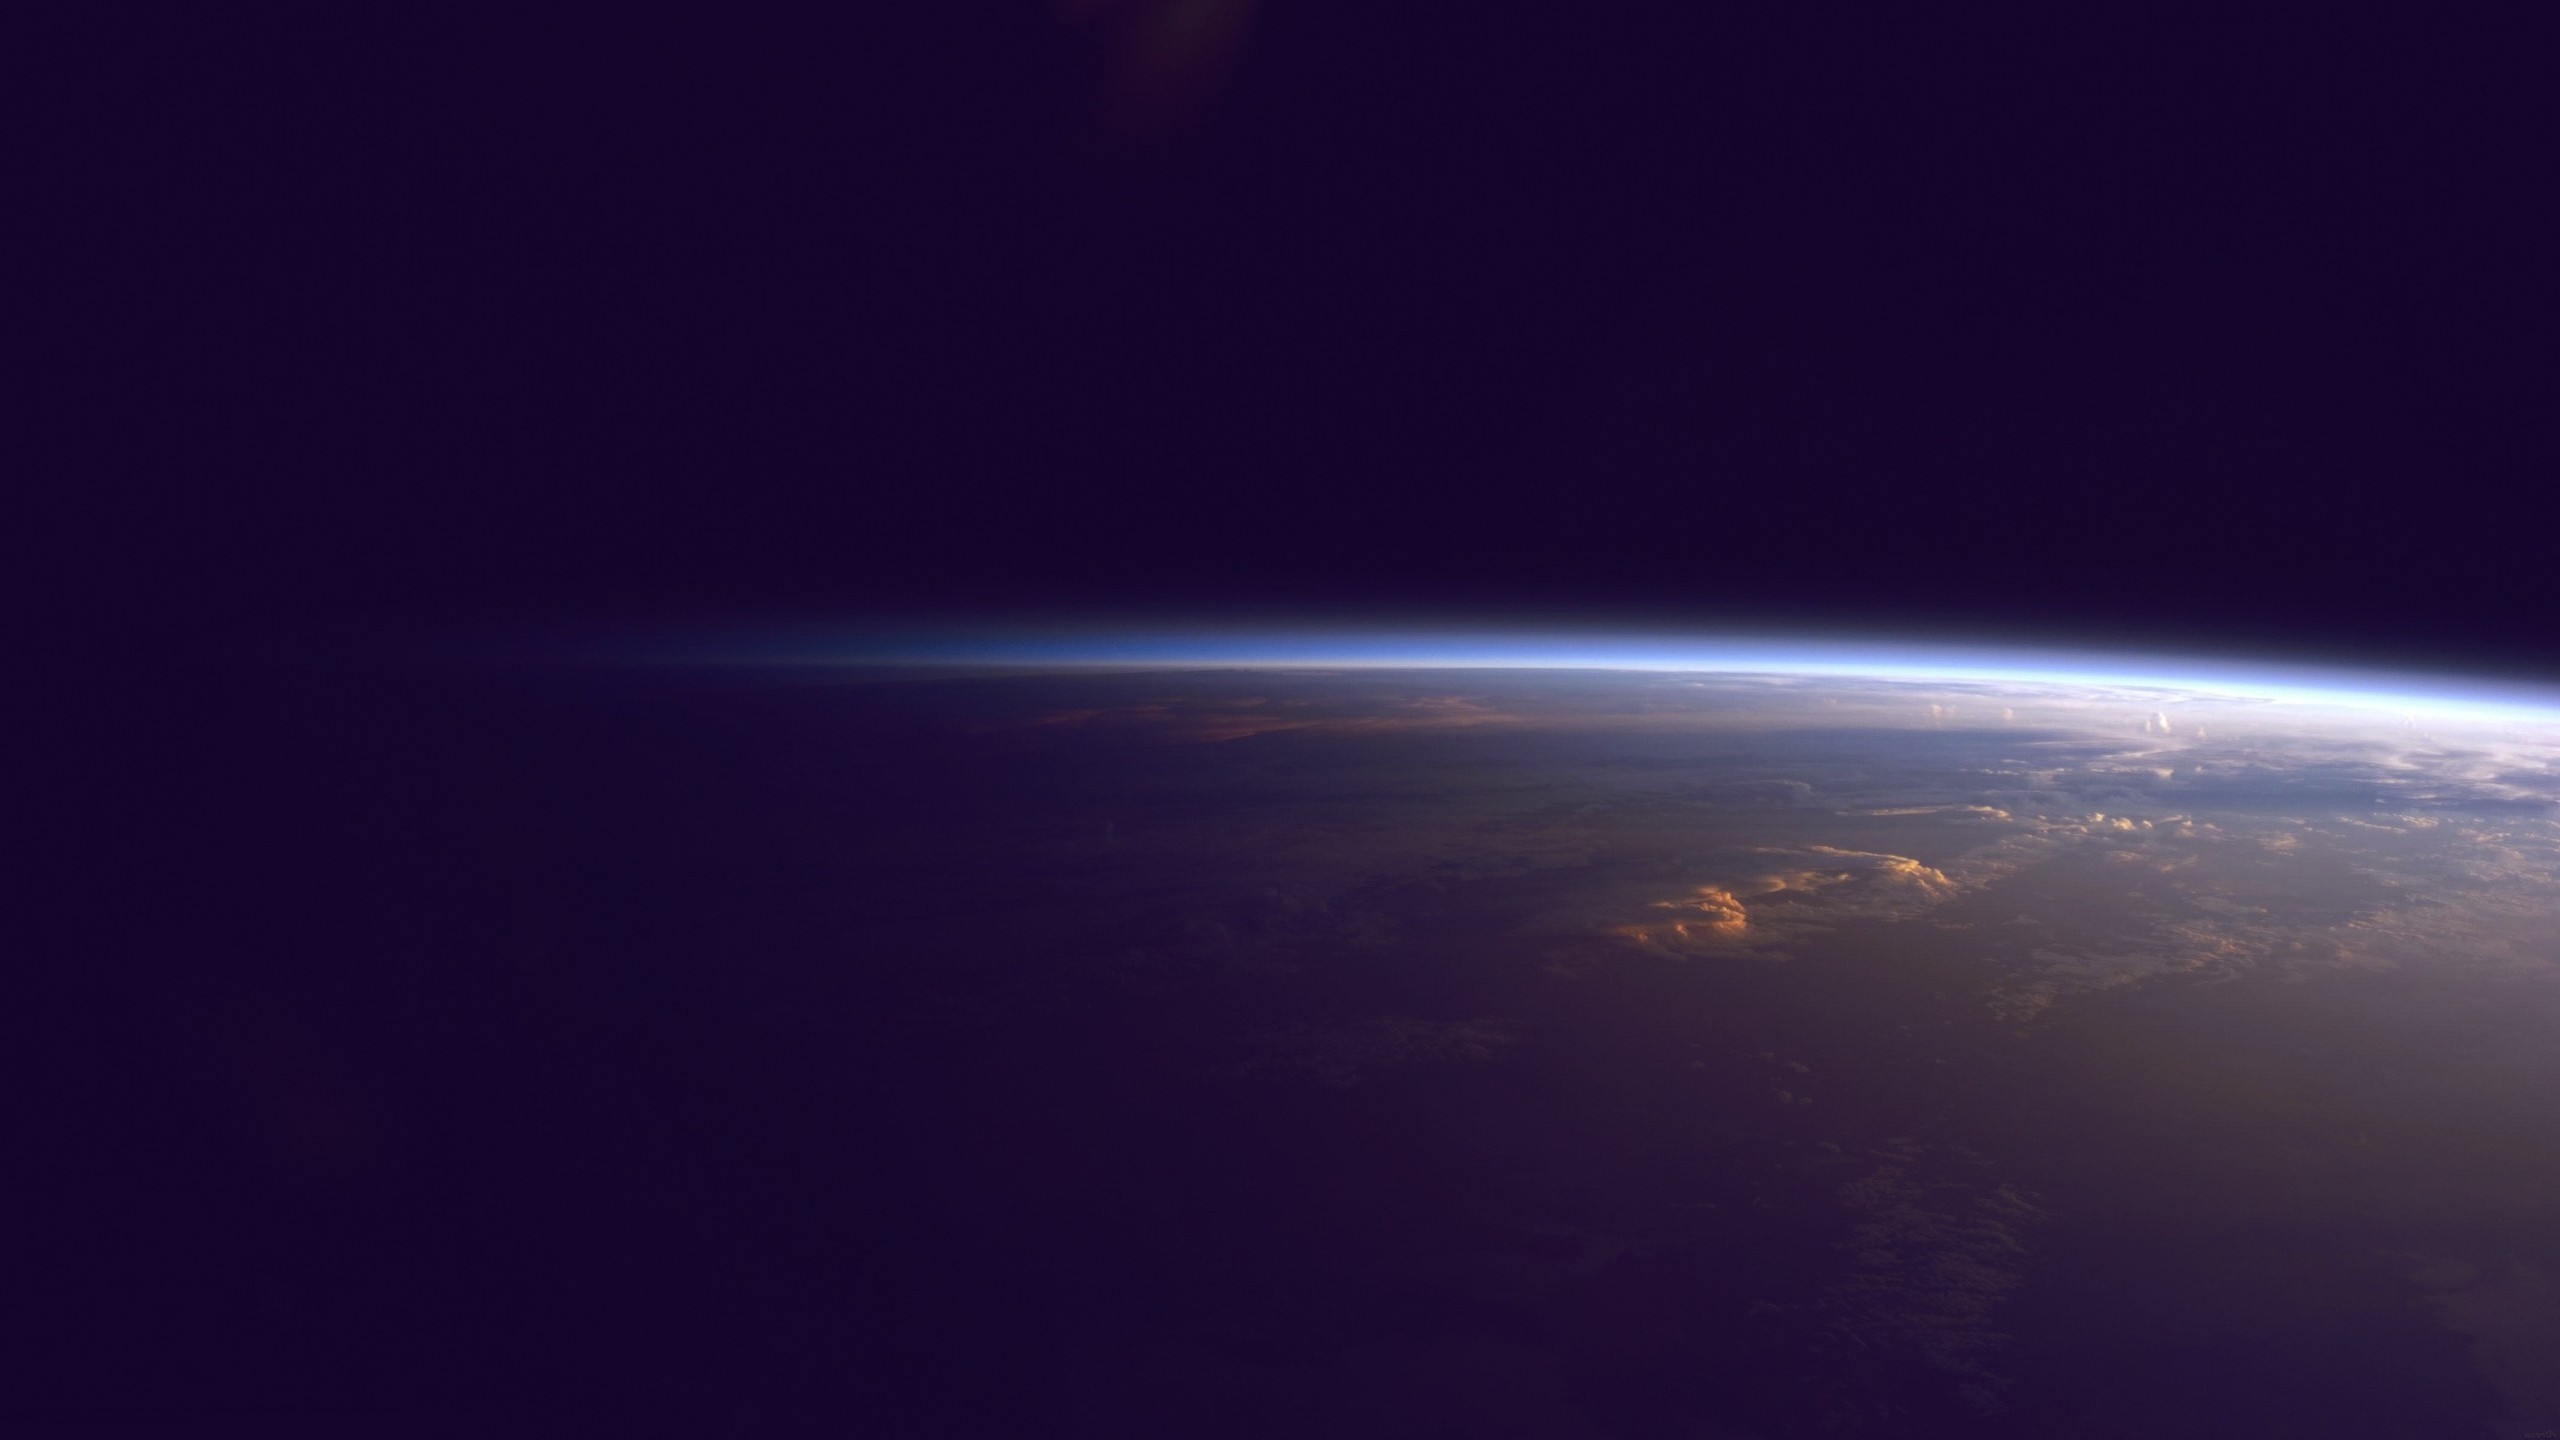 Earth From Outer Space